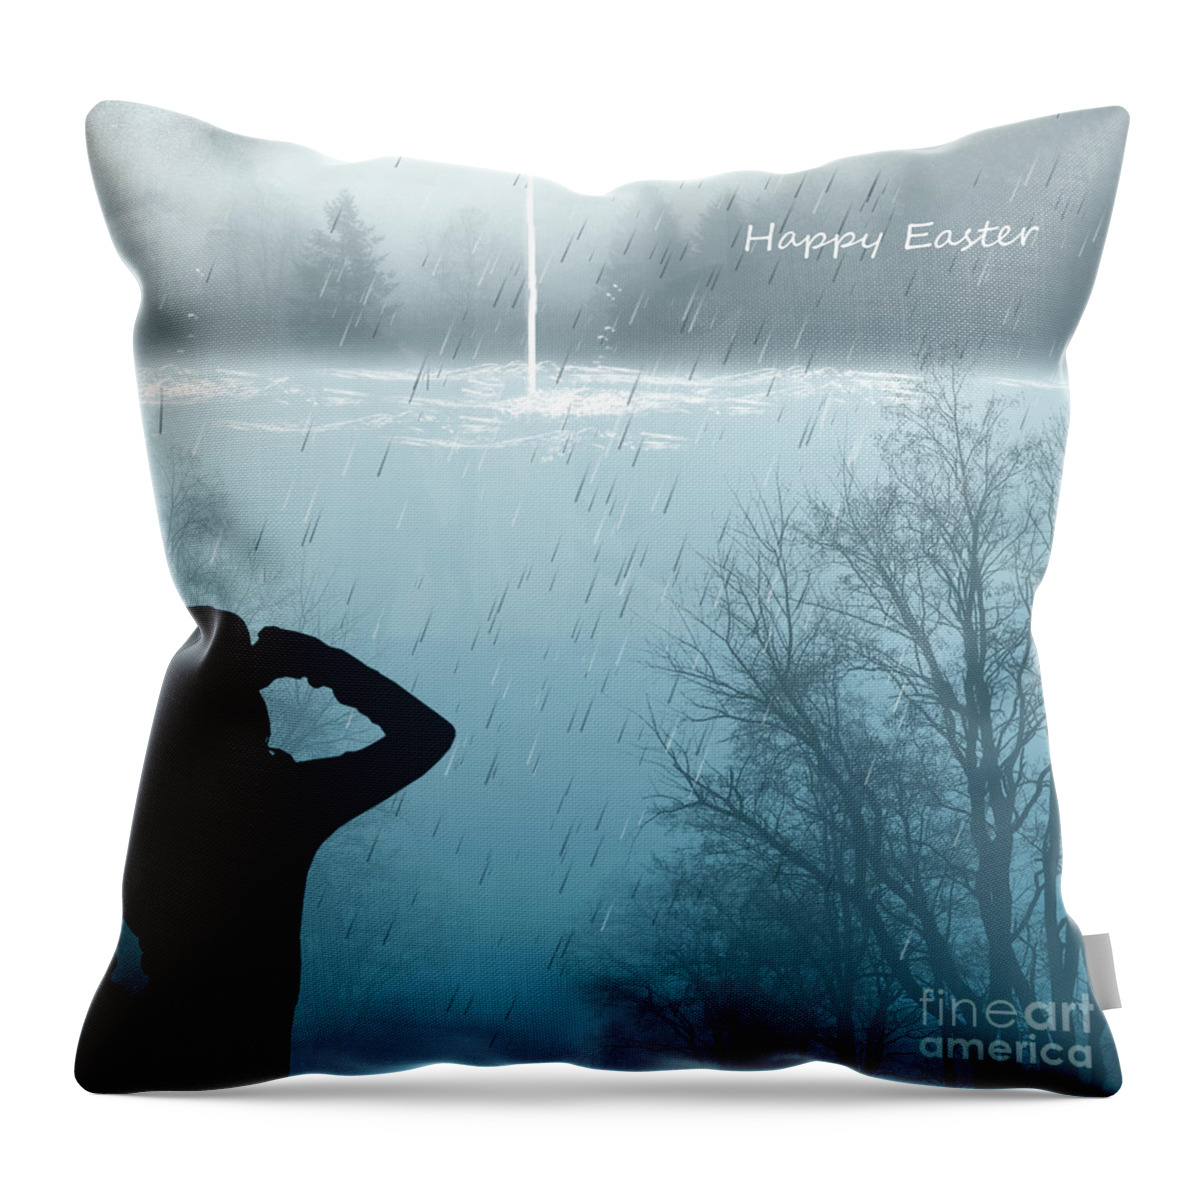 He Lives Throw Pillow featuring the digital art Easter 2016 by Trilby Cole